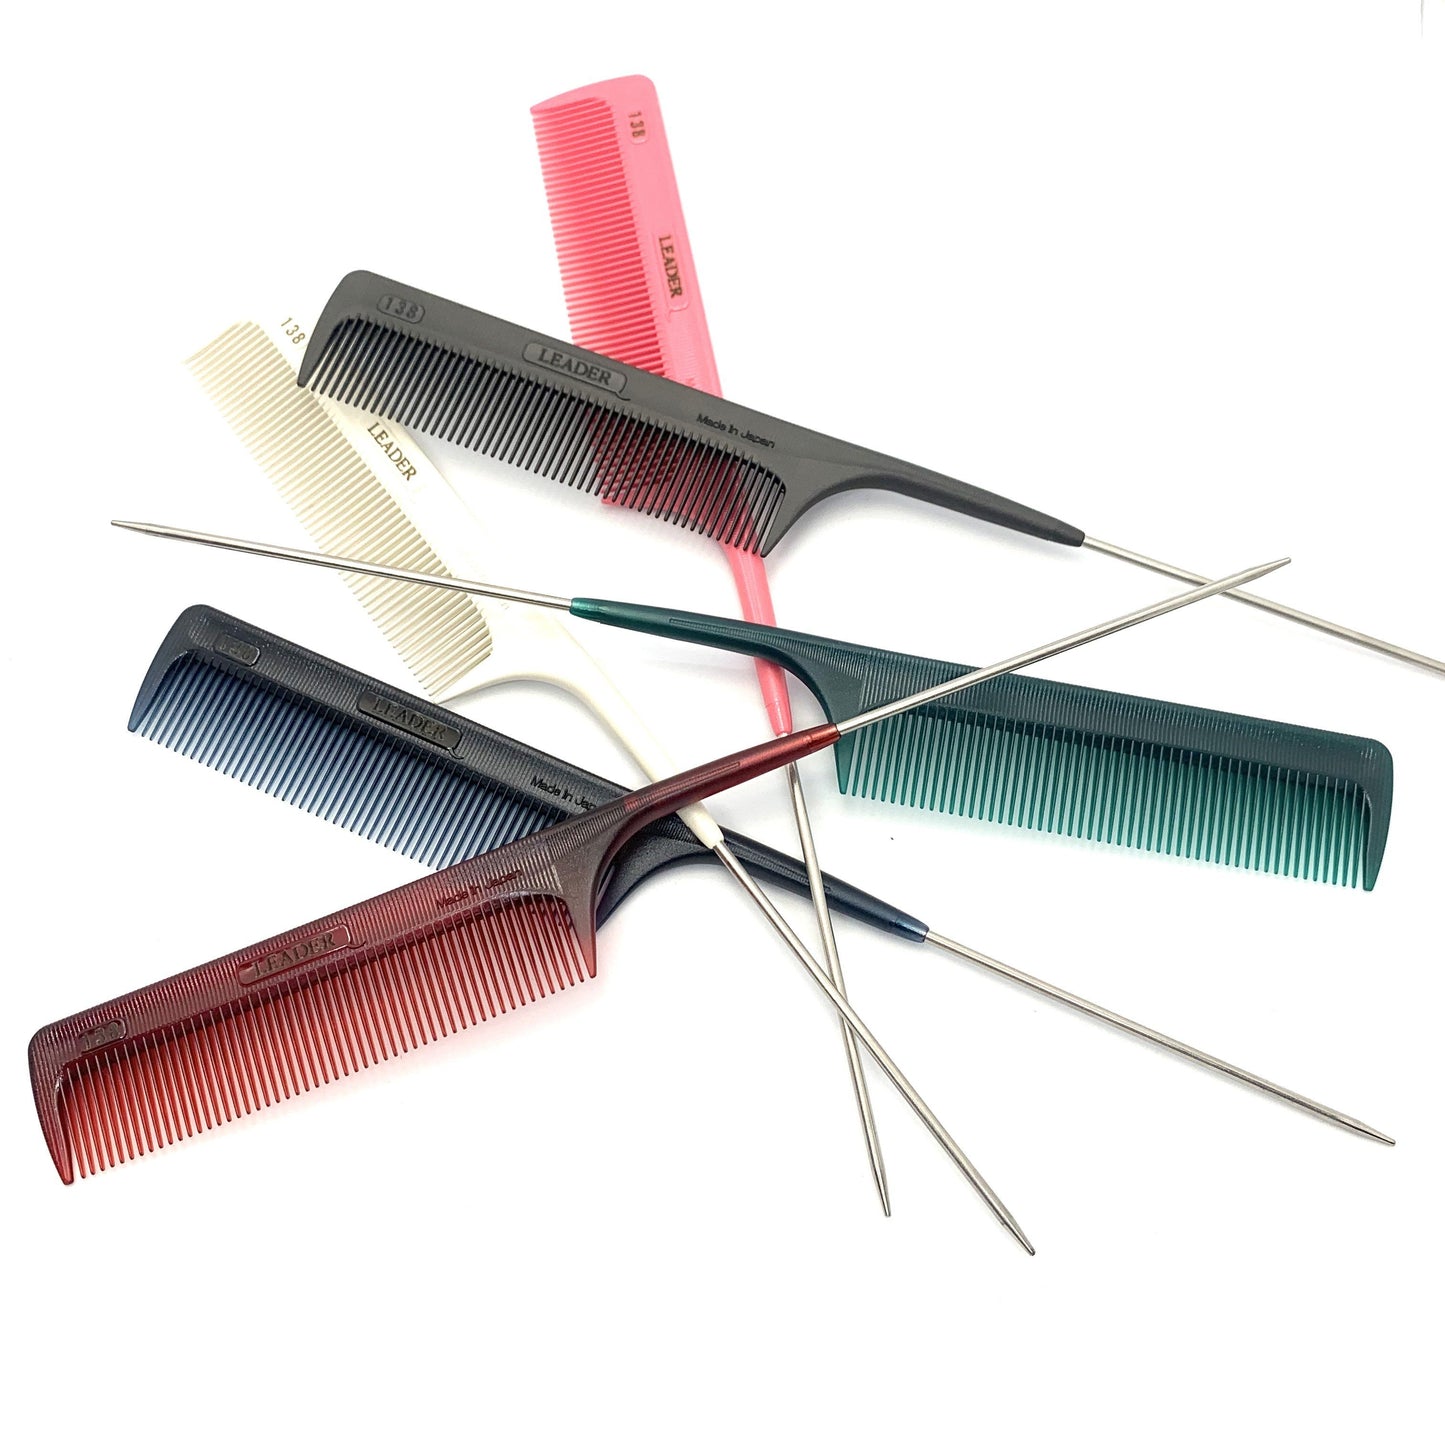 
                  
                    Leader SP 138 Metal Tailcomb Hairbrained 
                  
                